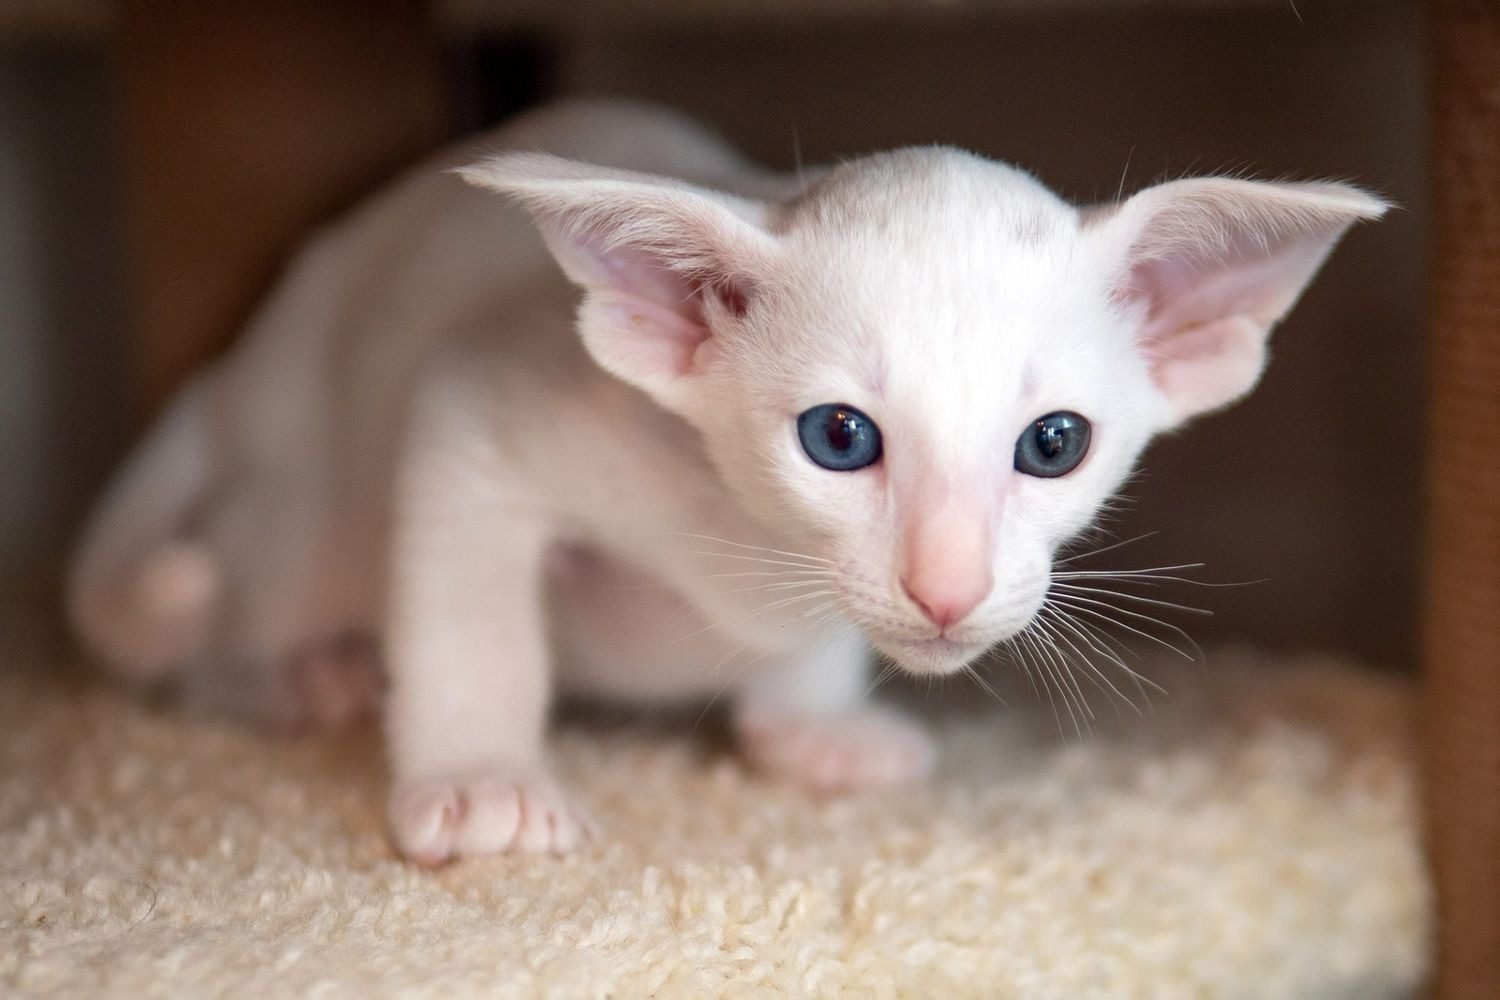 10 Black and White Cat Breeds You Should Know About contain: Oriental Shorthair